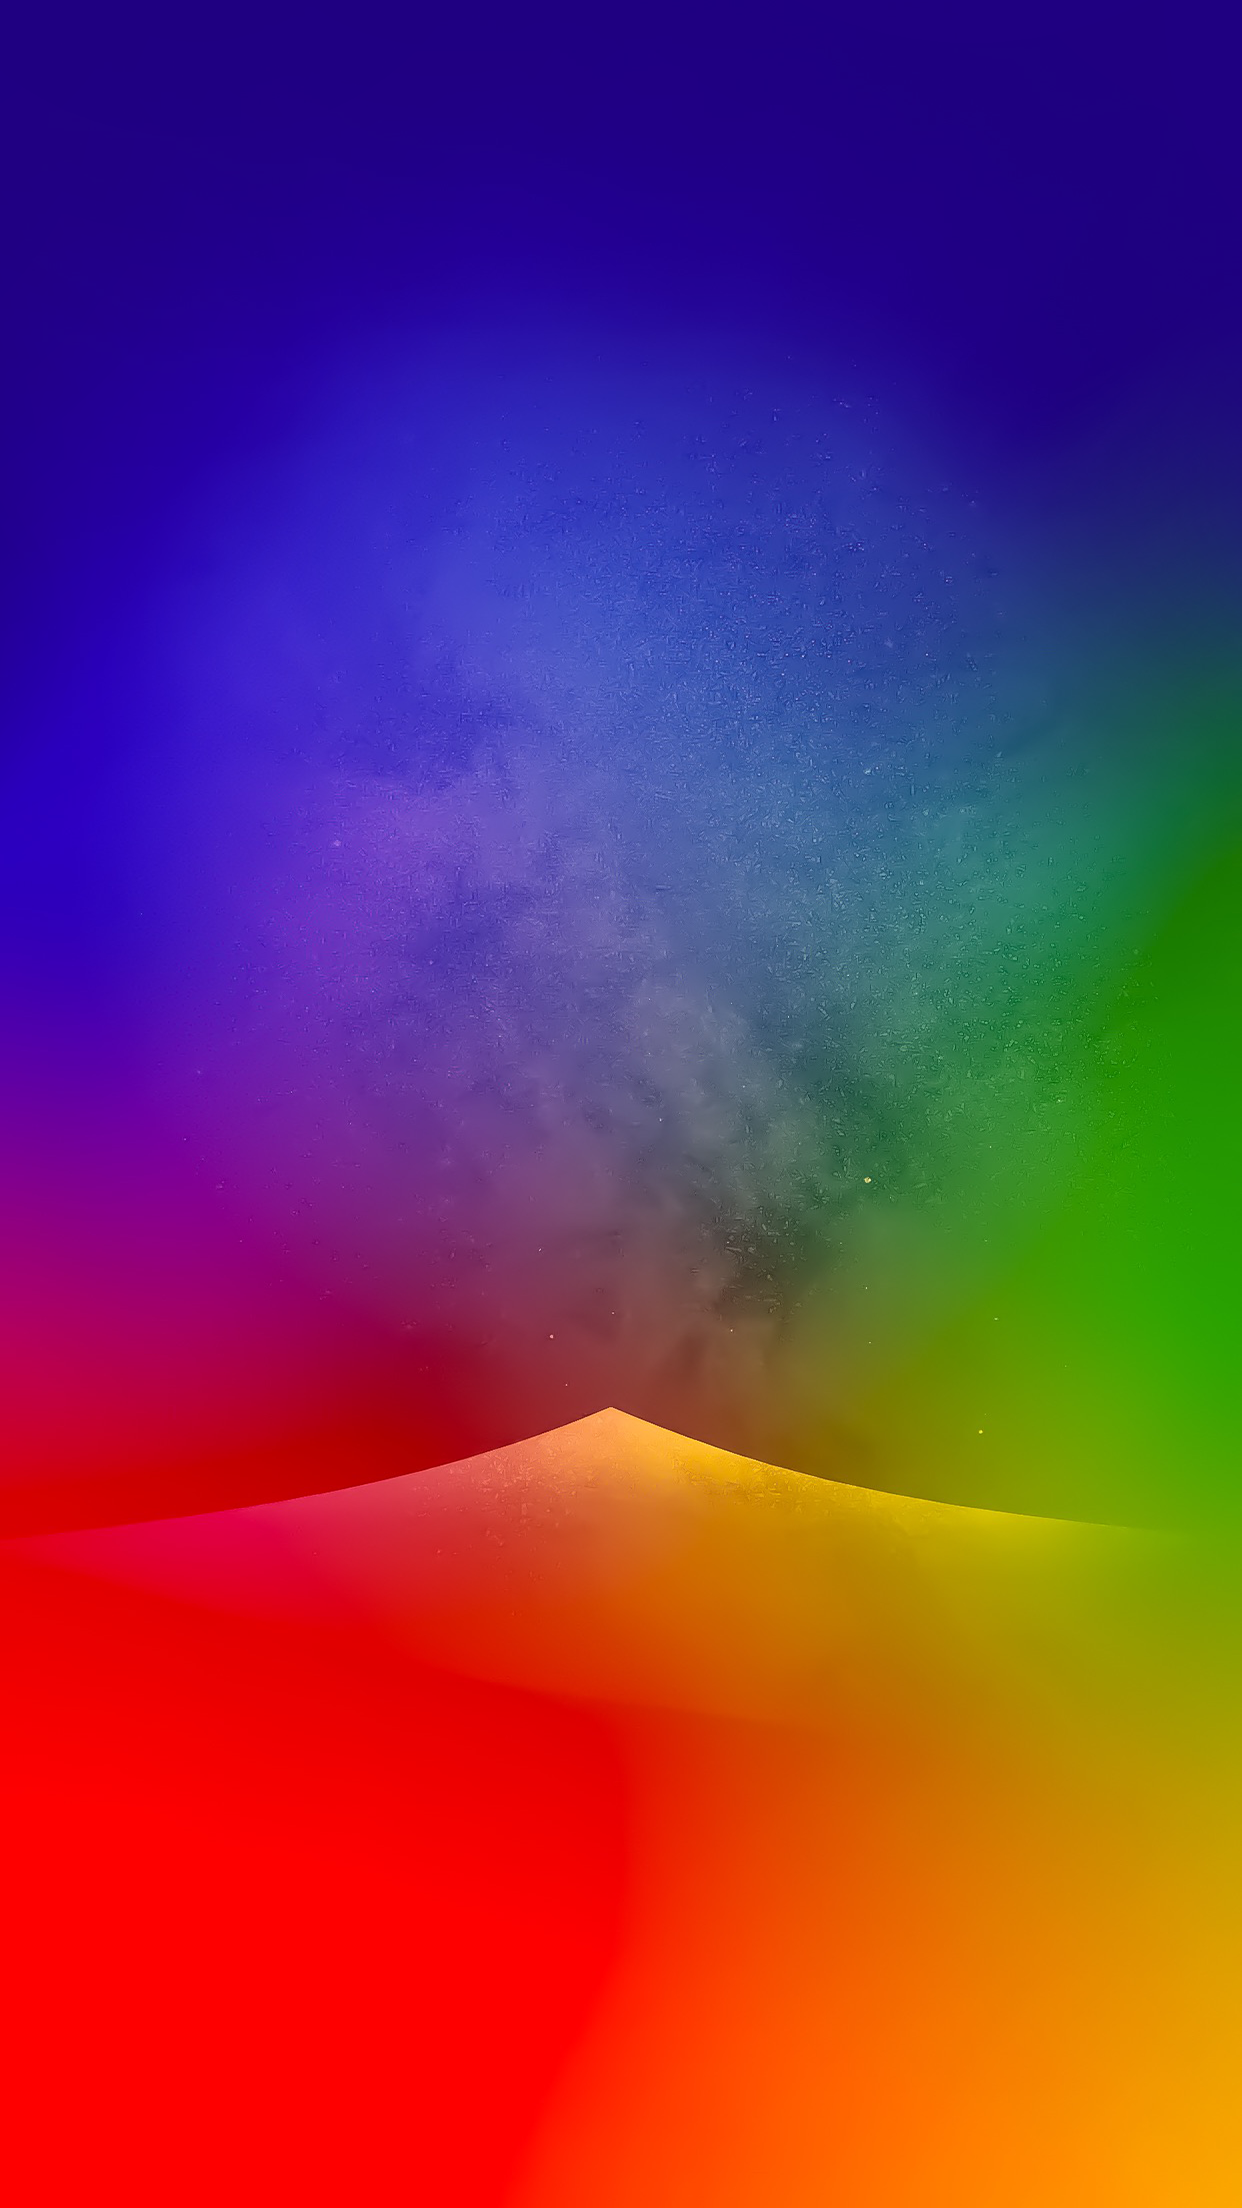 by on Twitter. Xiaomi wallpaper, Abstract iphone